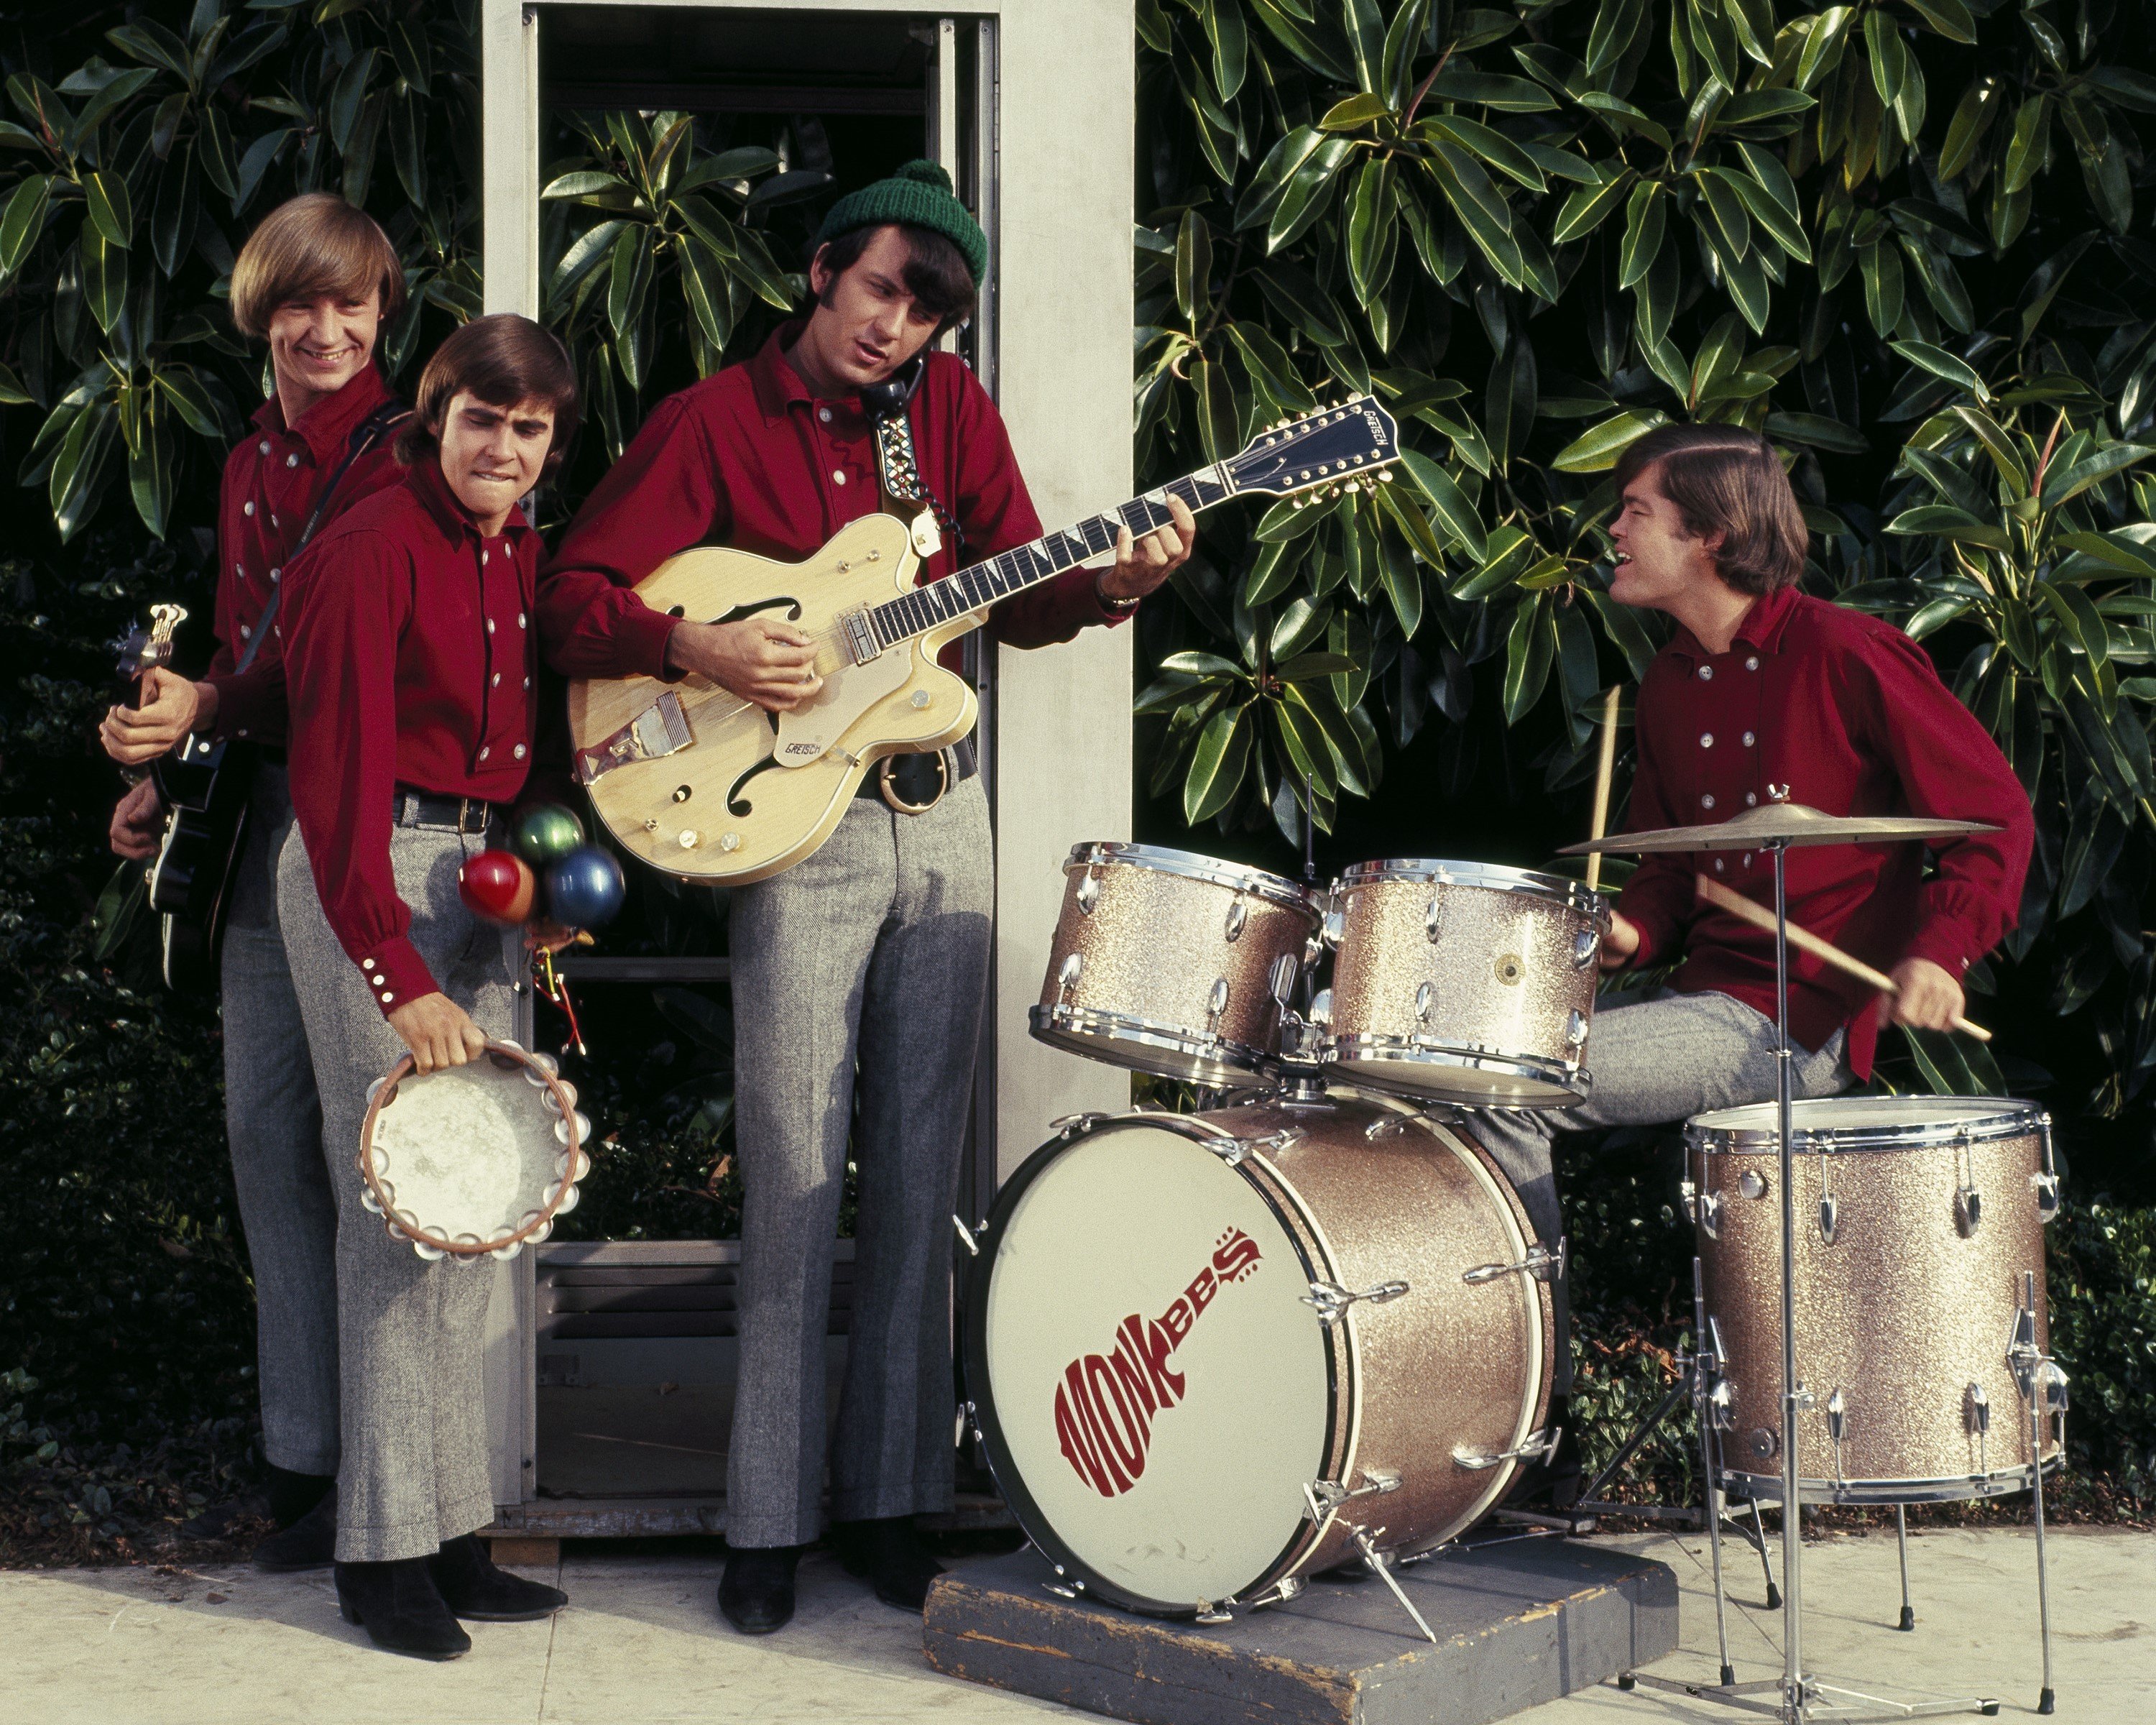 The Monkees playing instruments during the "I'm a Believer" era